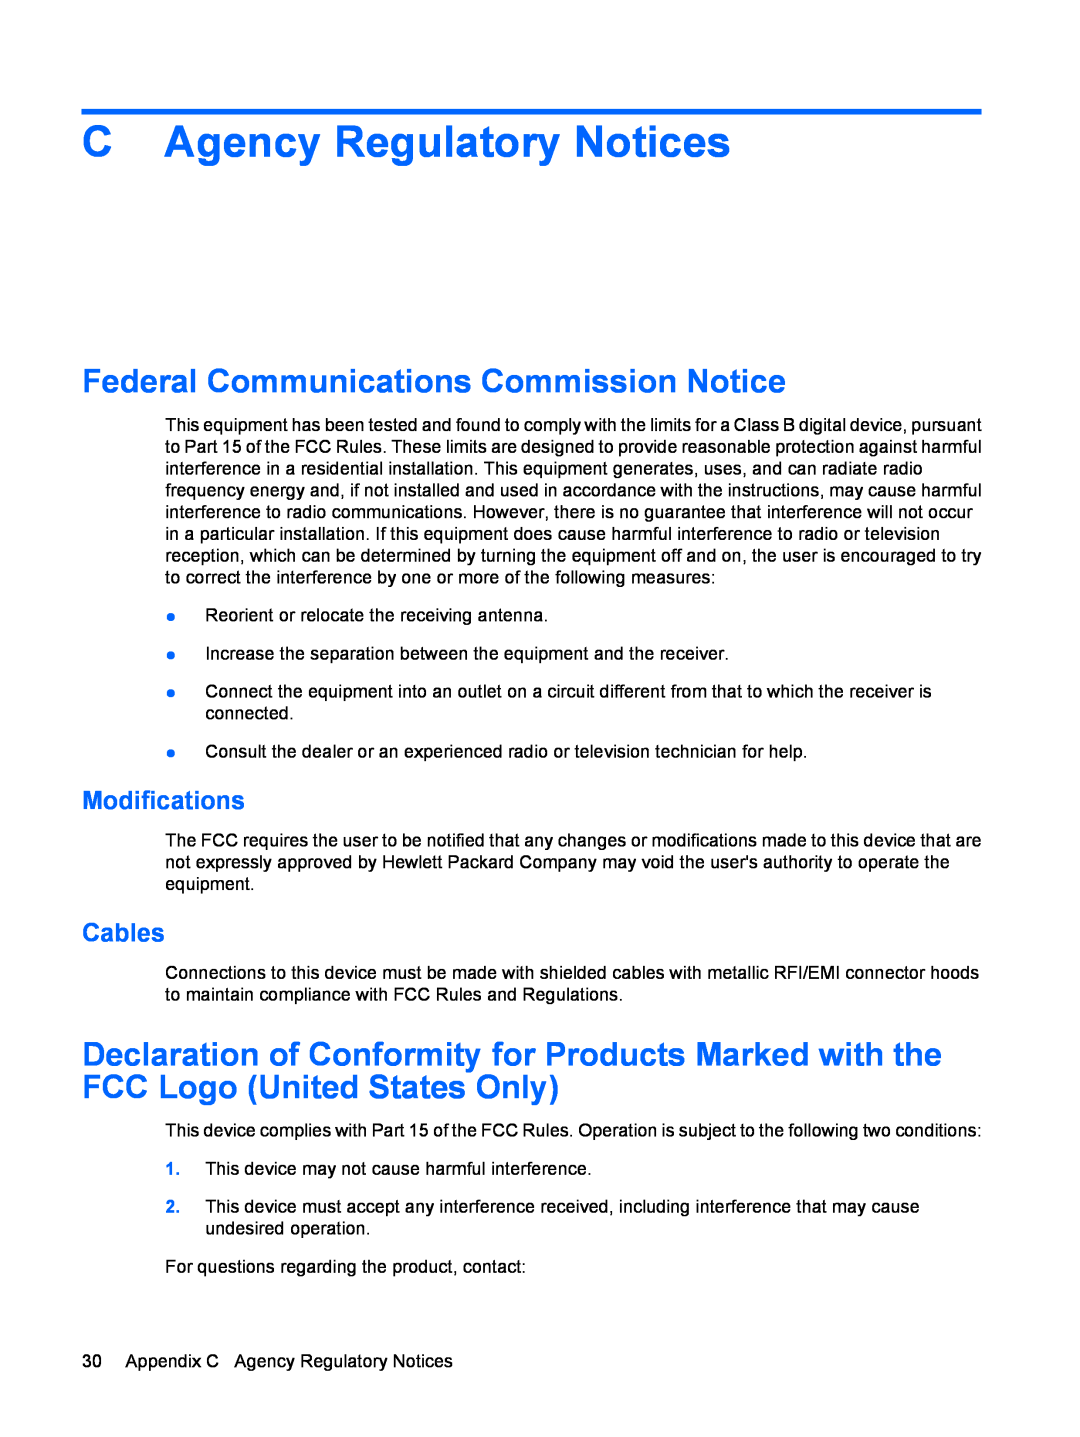 HP LE1711 17-inch manual C Agency Regulatory Notices, Federal Communications Commission Notice, Modifications, Cables 